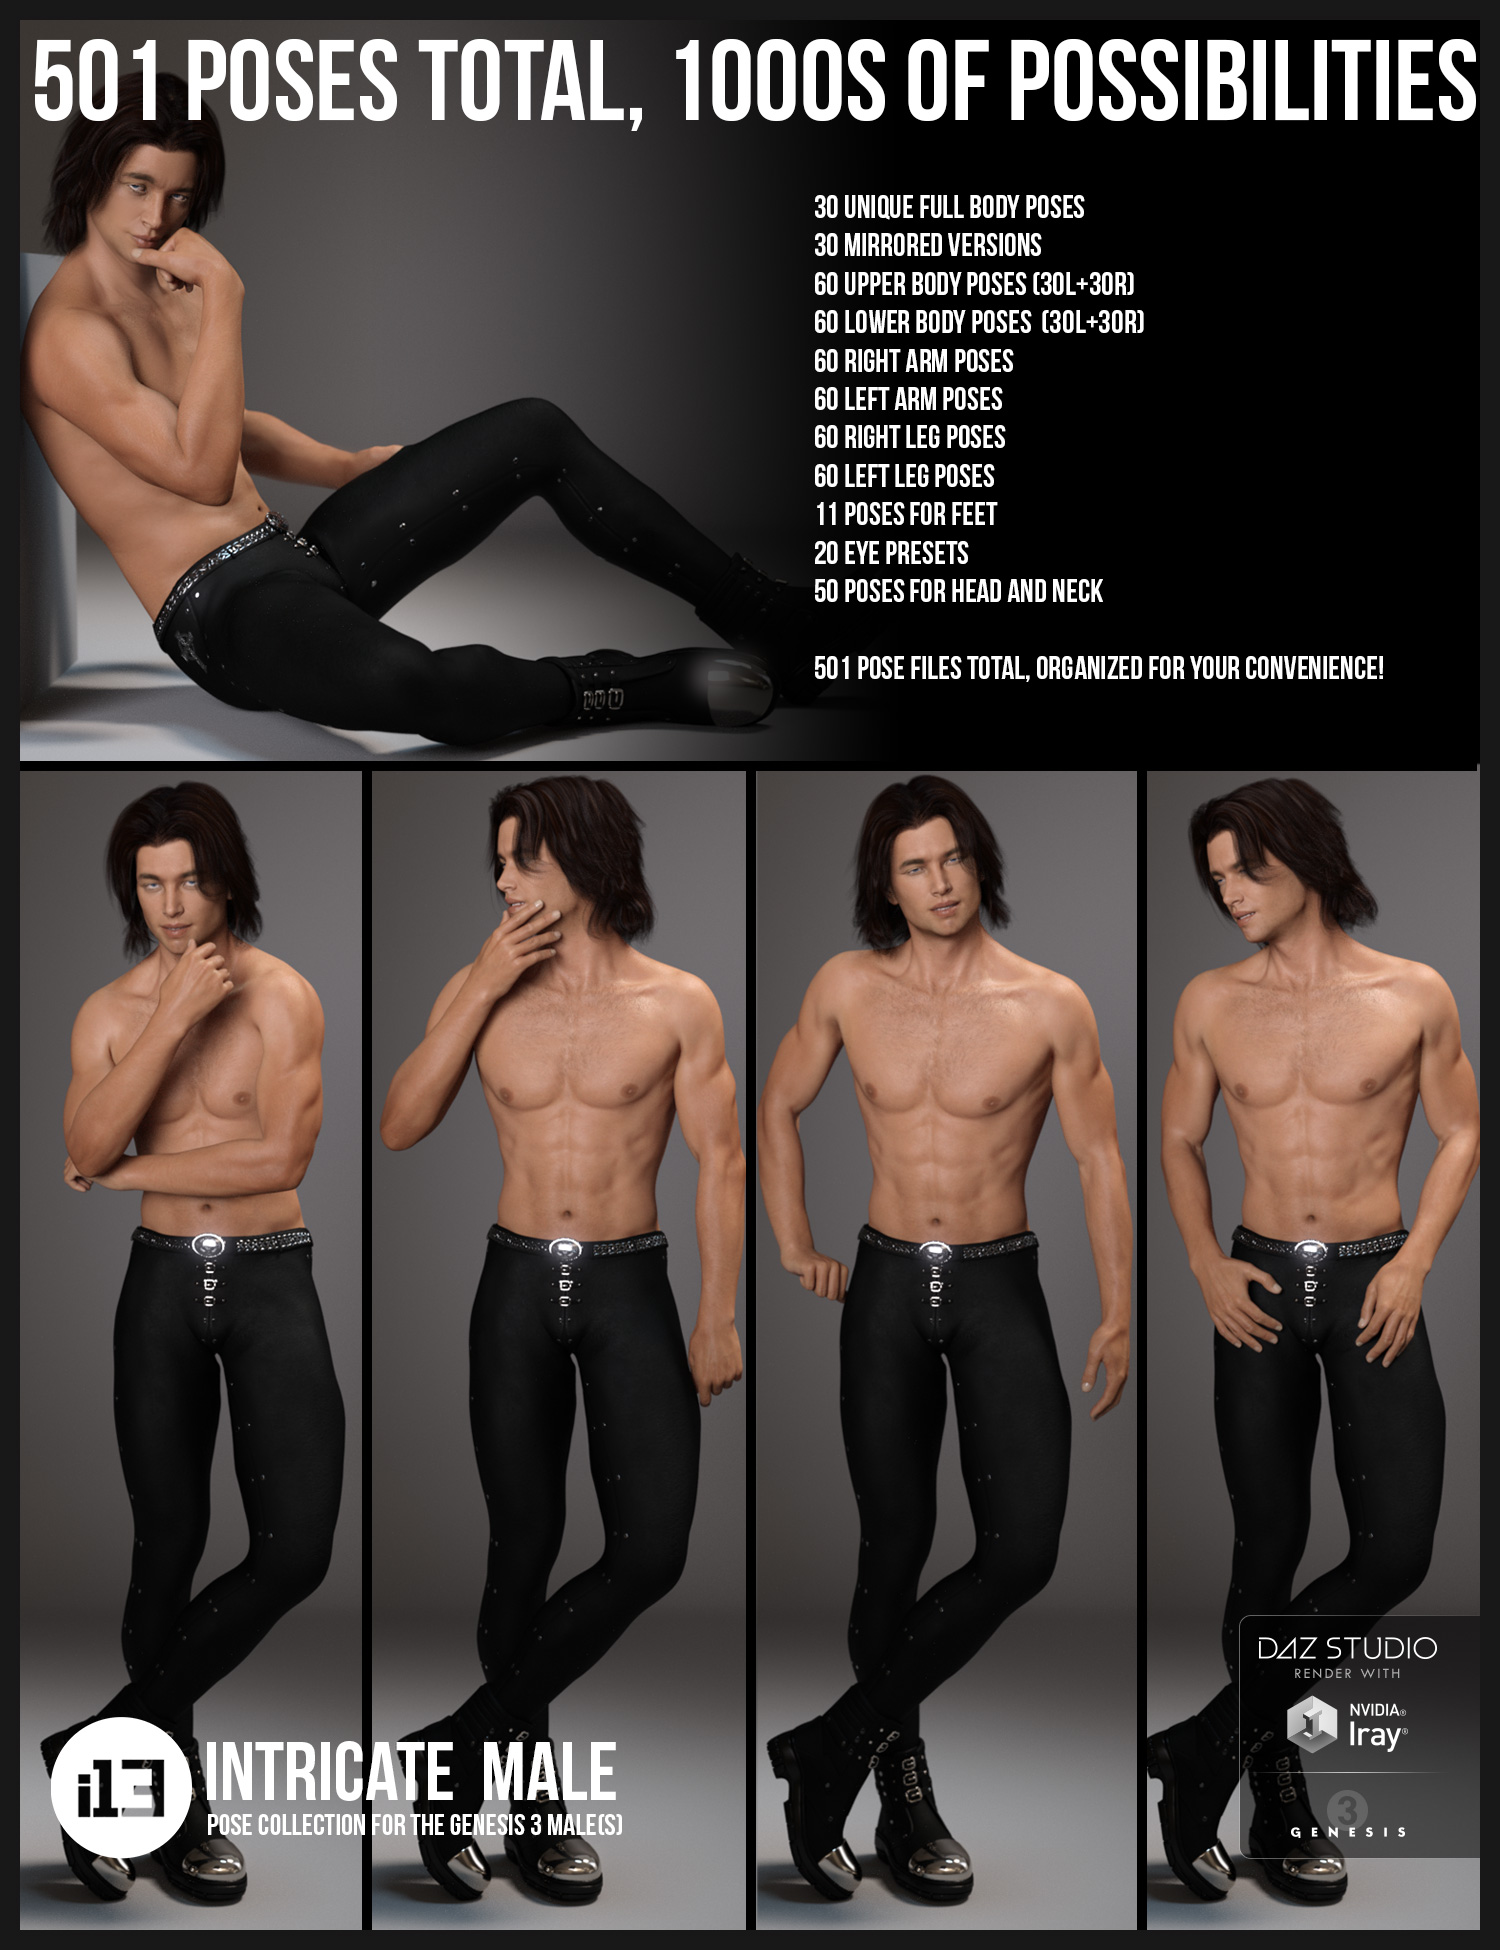 i13 Intricate Male Pose Collection for the Genesis 3 Male(s) by: ironman13, 3D Models by Daz 3D